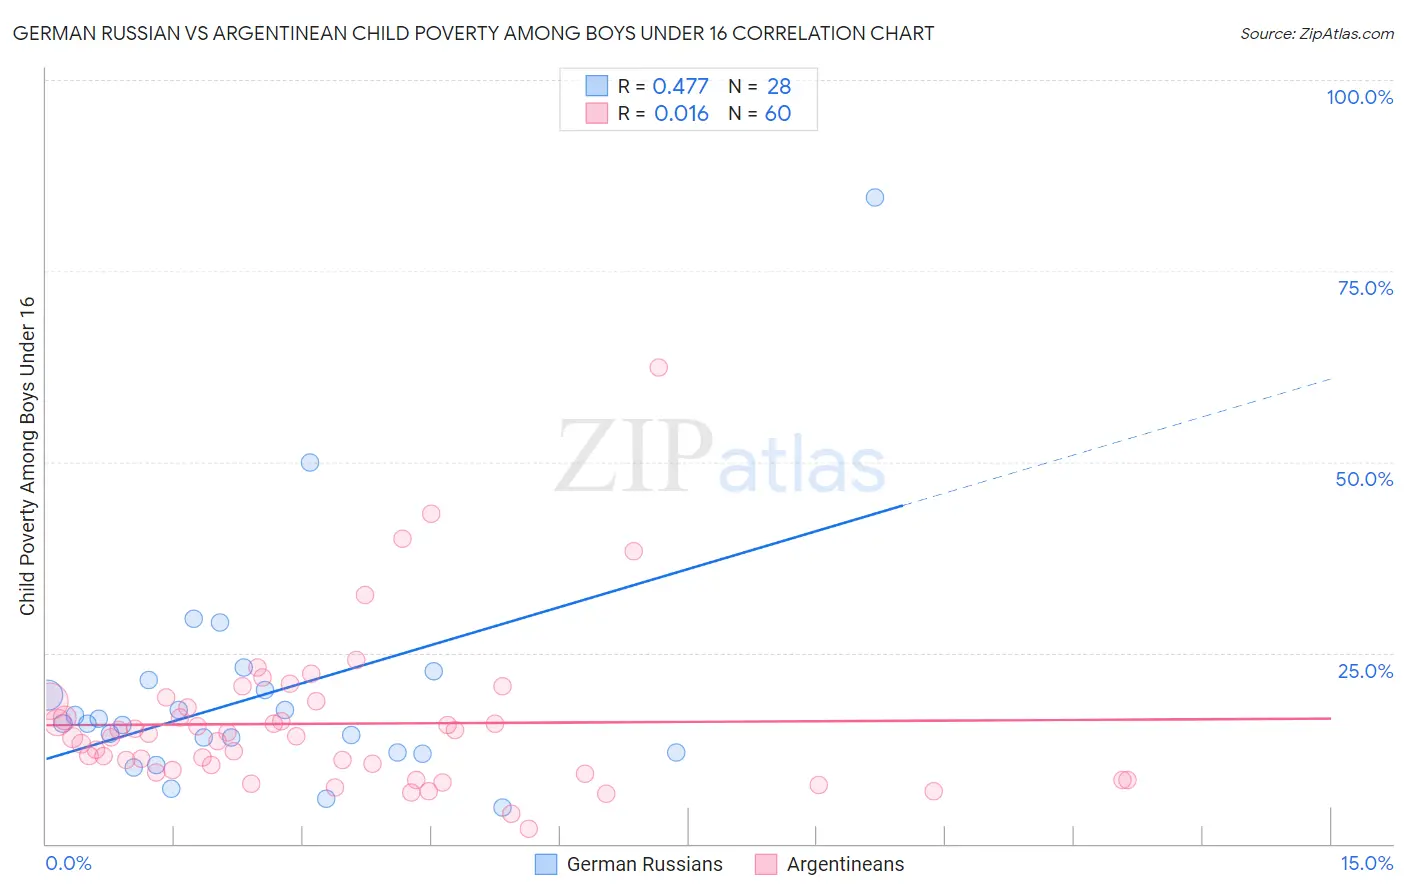 German Russian vs Argentinean Child Poverty Among Boys Under 16